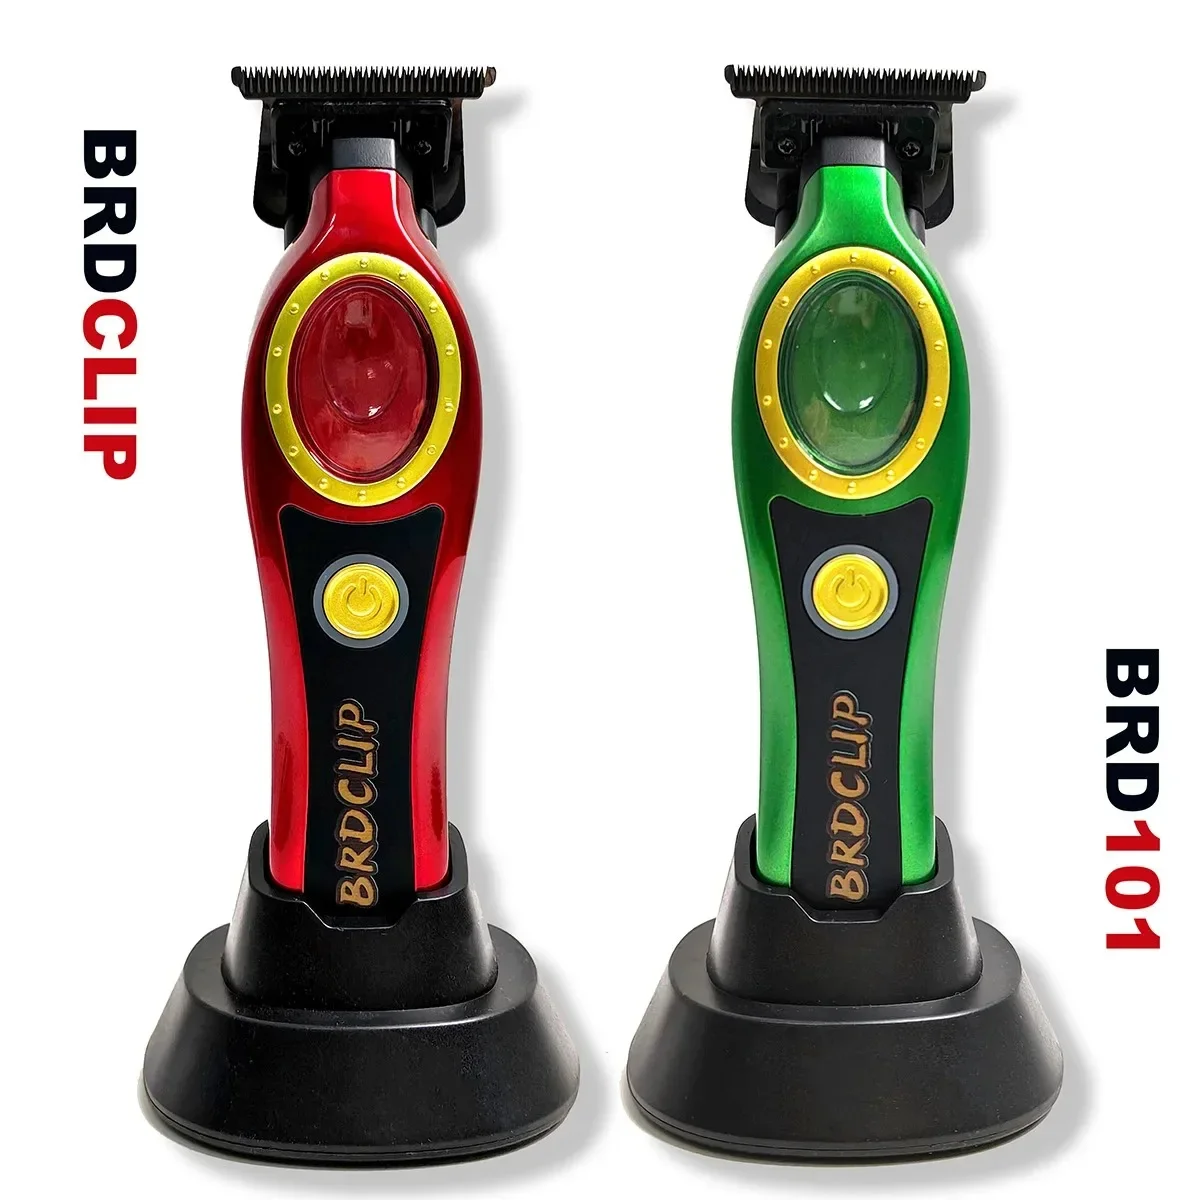 

BRDCLIP BRD101 Barber Shop Men's Professional Sculpting Gradient High Power Hair Clipper with Charging Base Set 3 Limit Combs